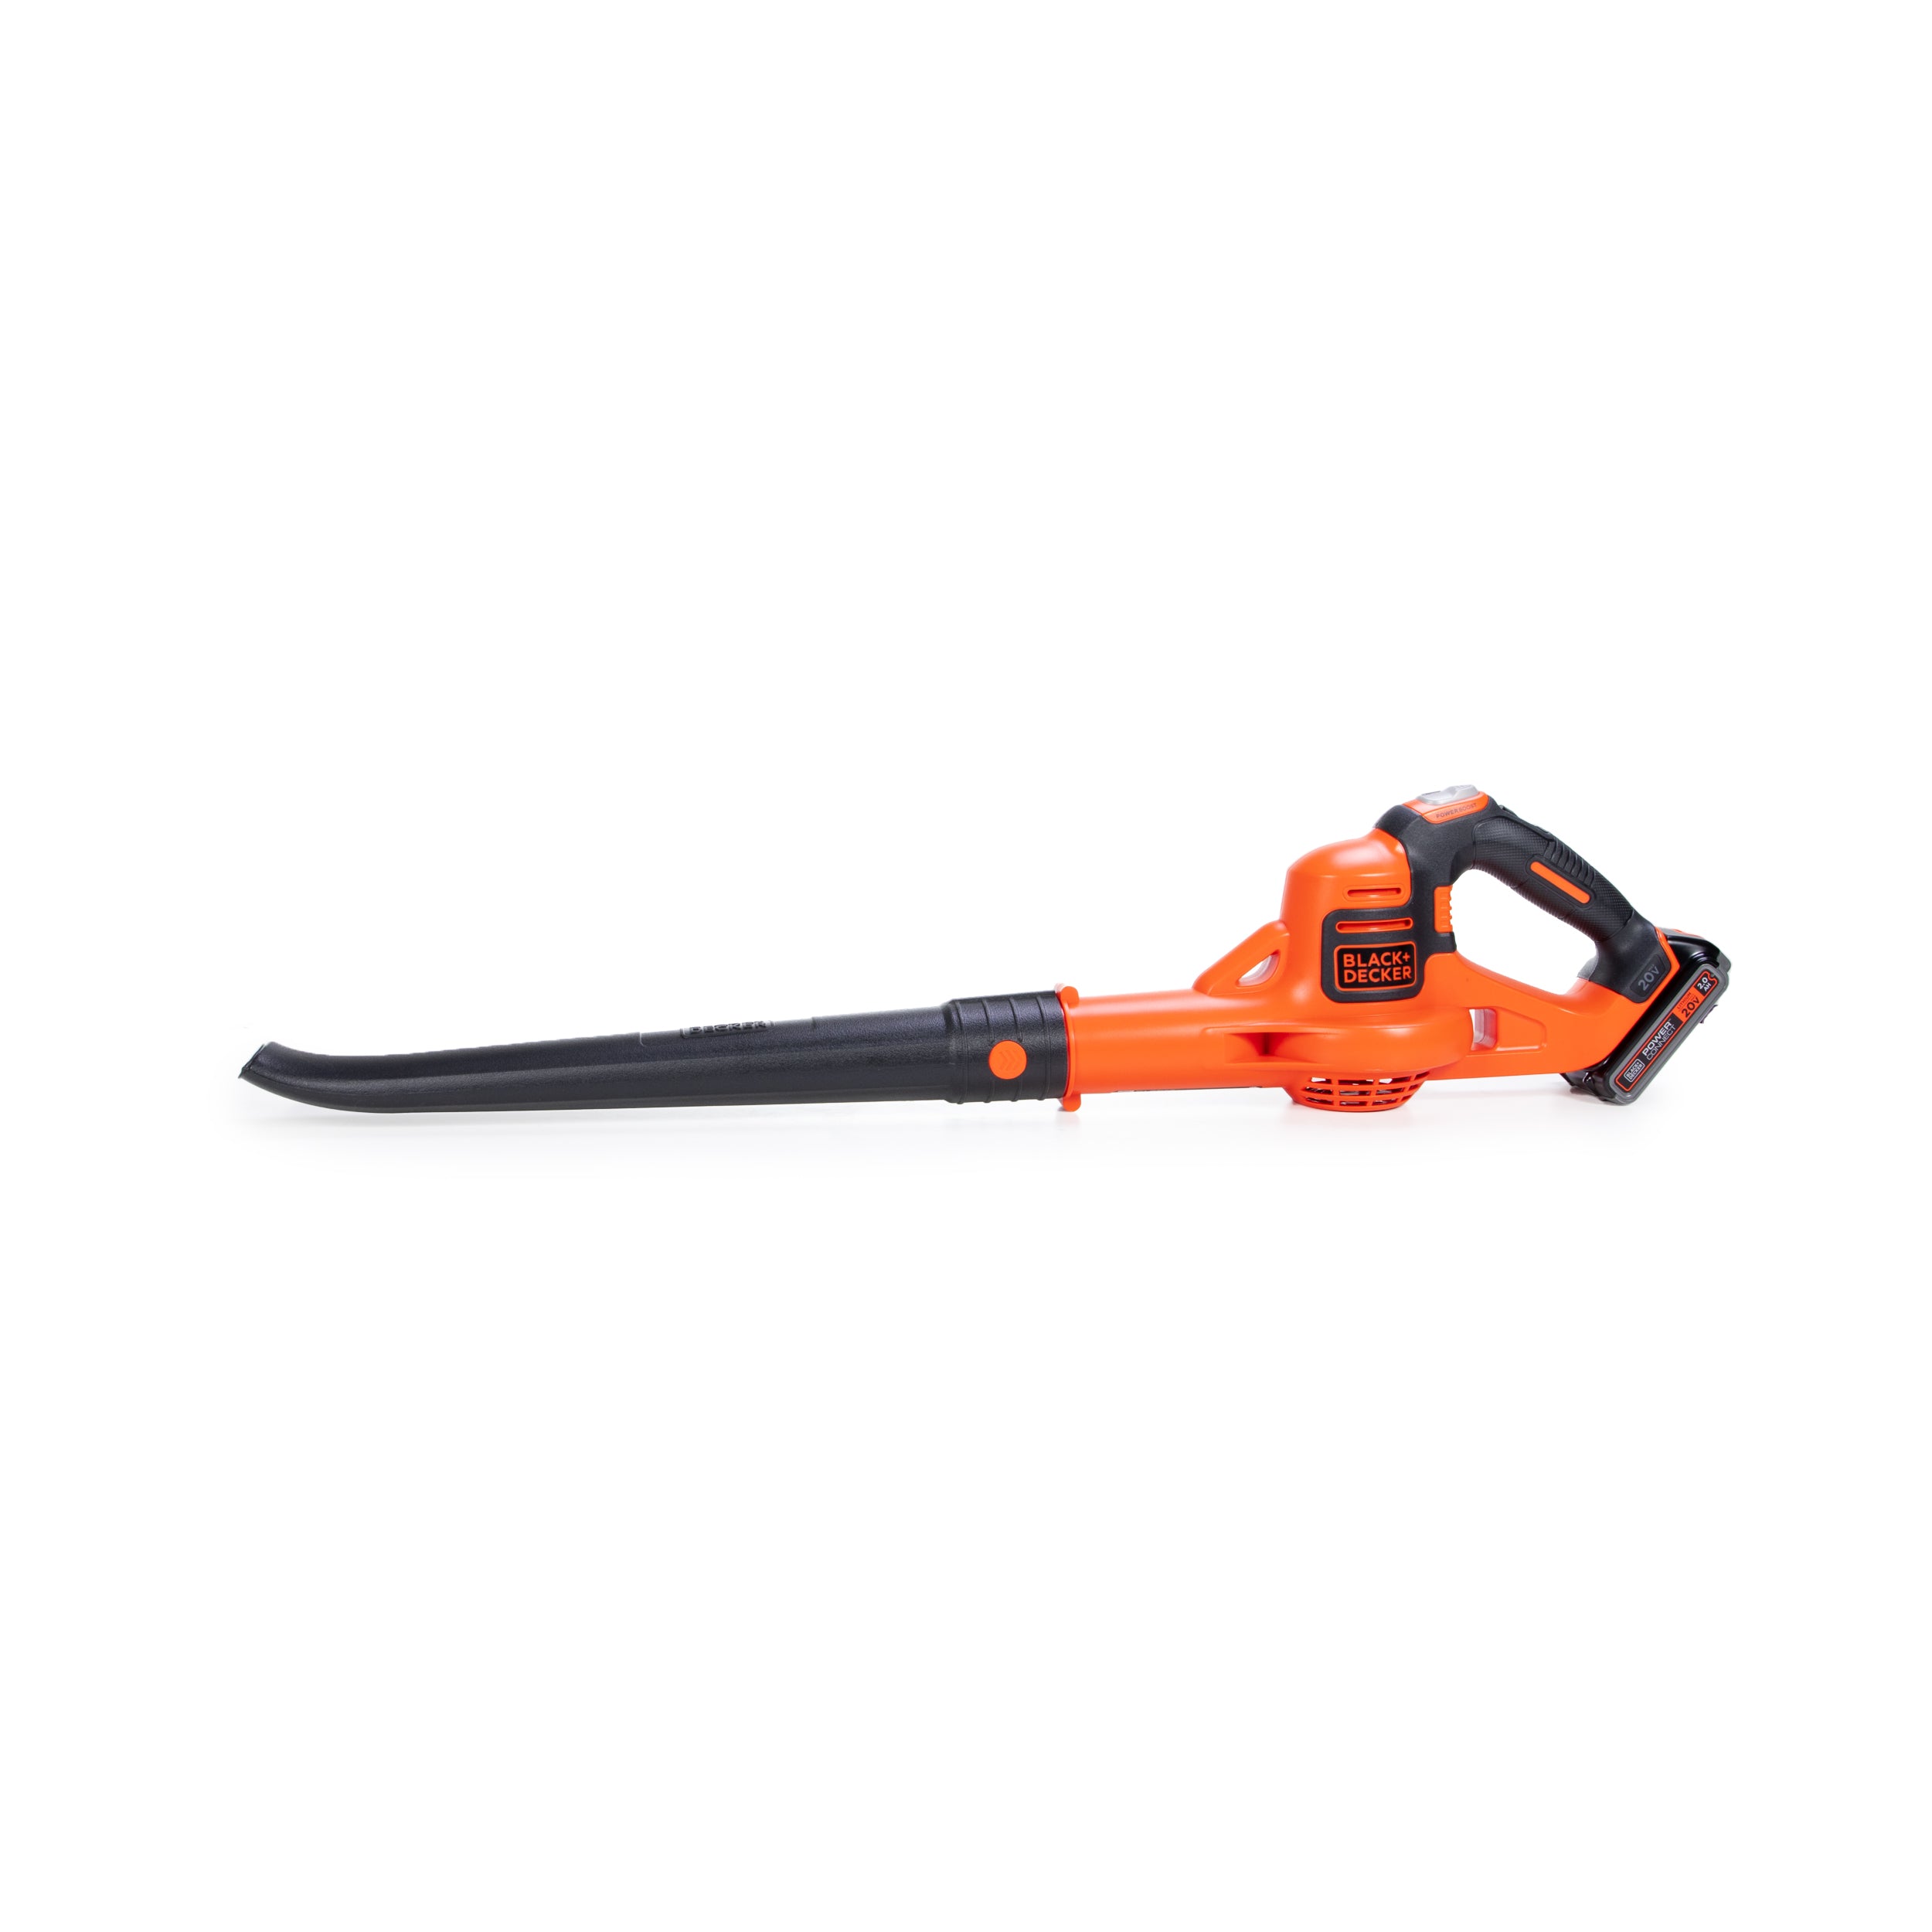 BLACK+DECKER 20V MAX Cordless Leaf Blower, 2-Speed, up to 90 MPH